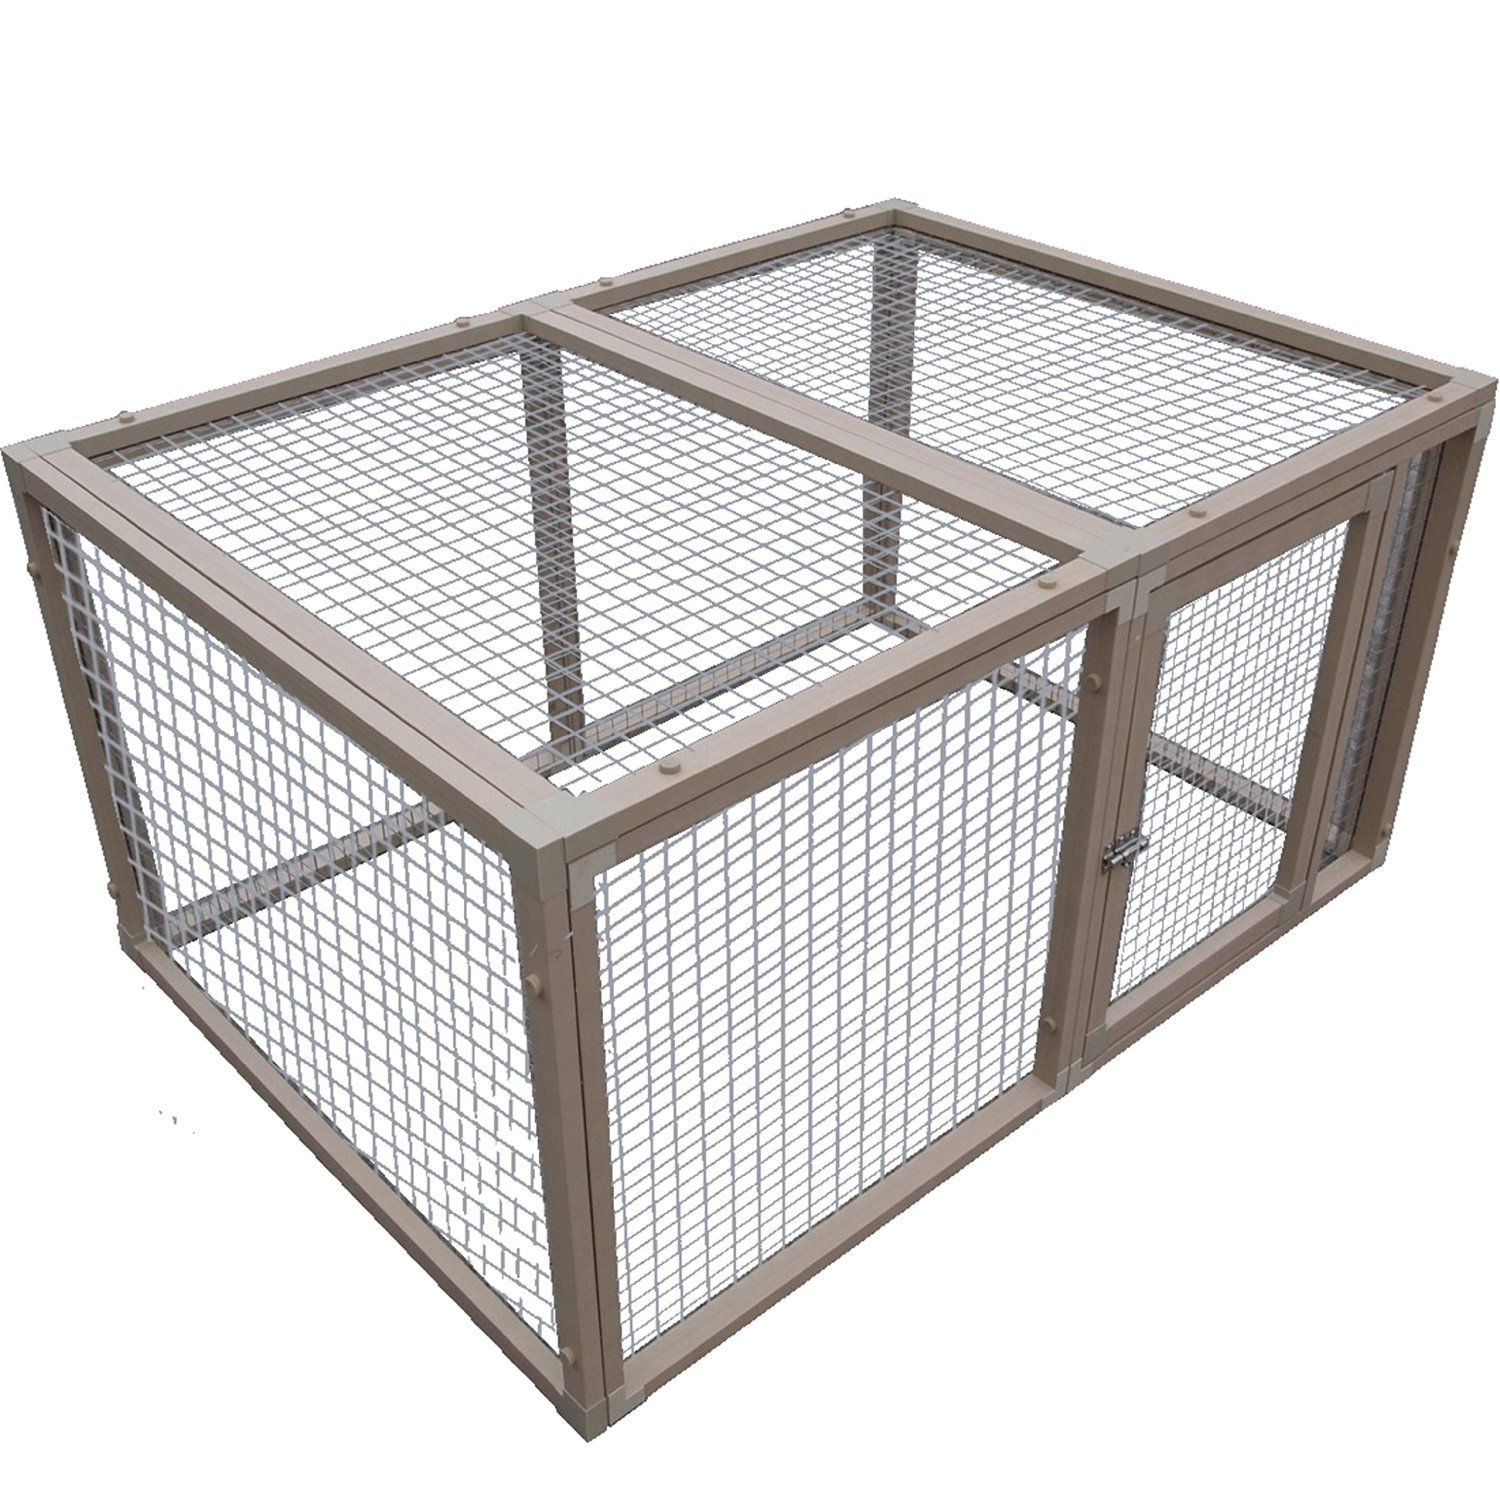 Chicken Coop Cage House Building Poultry Supply Fence Pen 